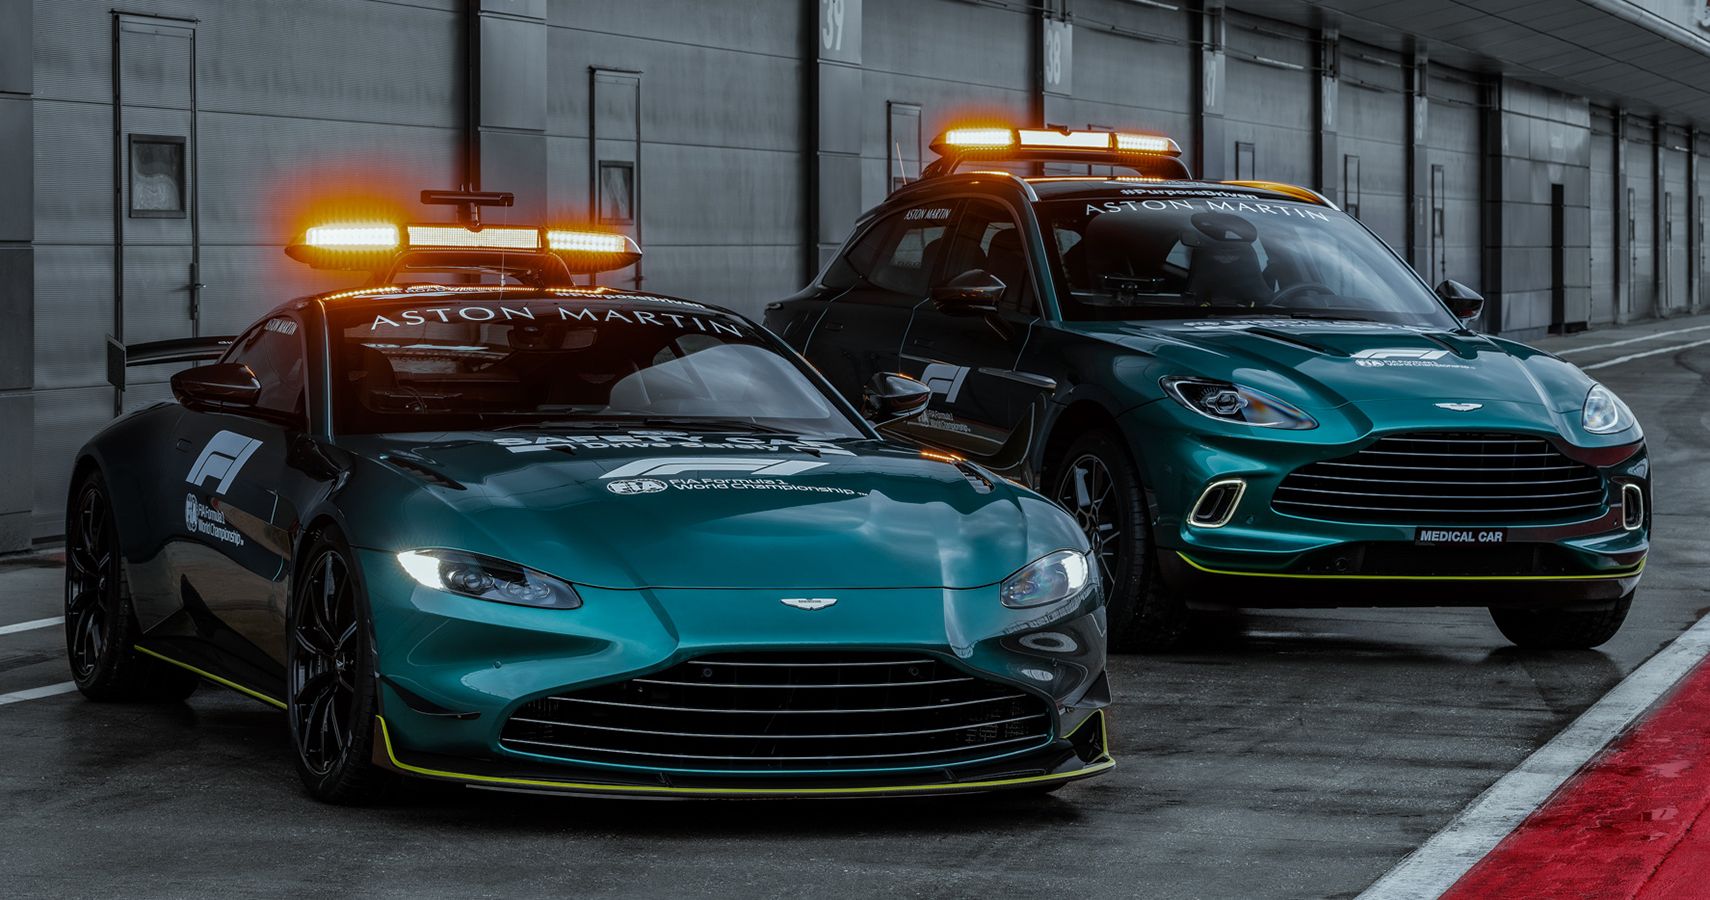 Aston Martin F1 Safety and Medical Cars pits